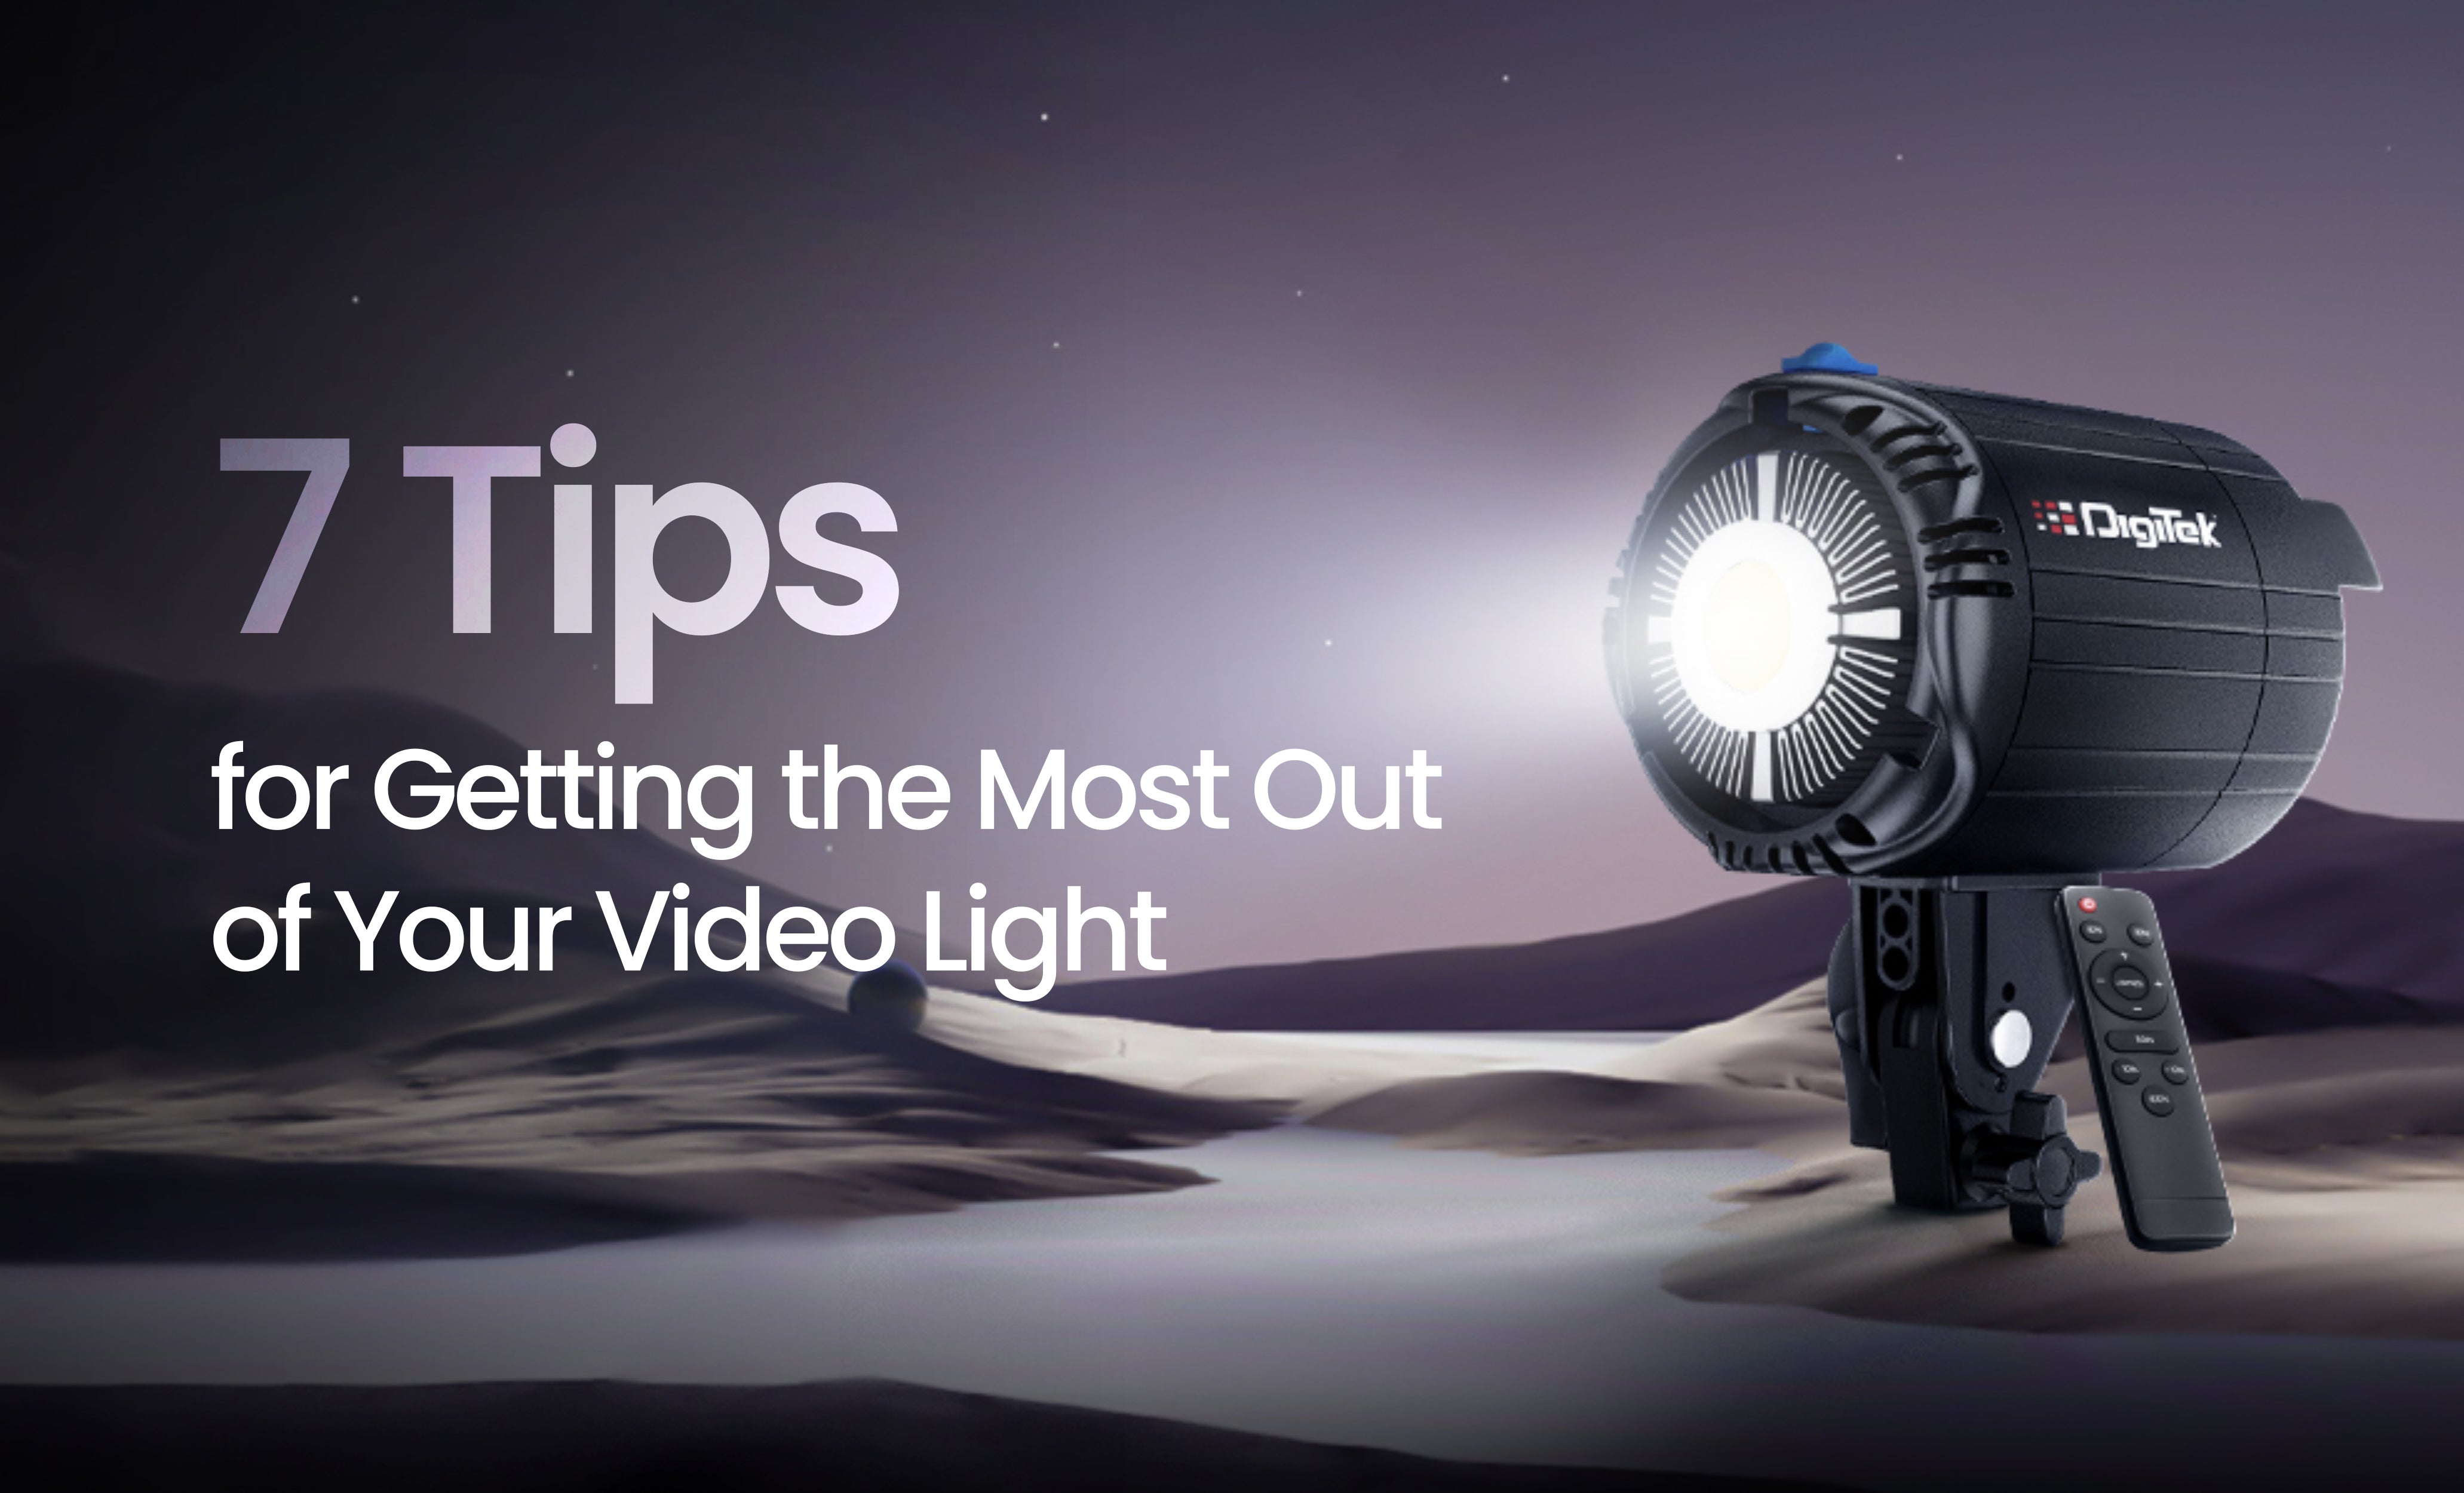 7 Tips for Getting the Most Out of Your Video Light